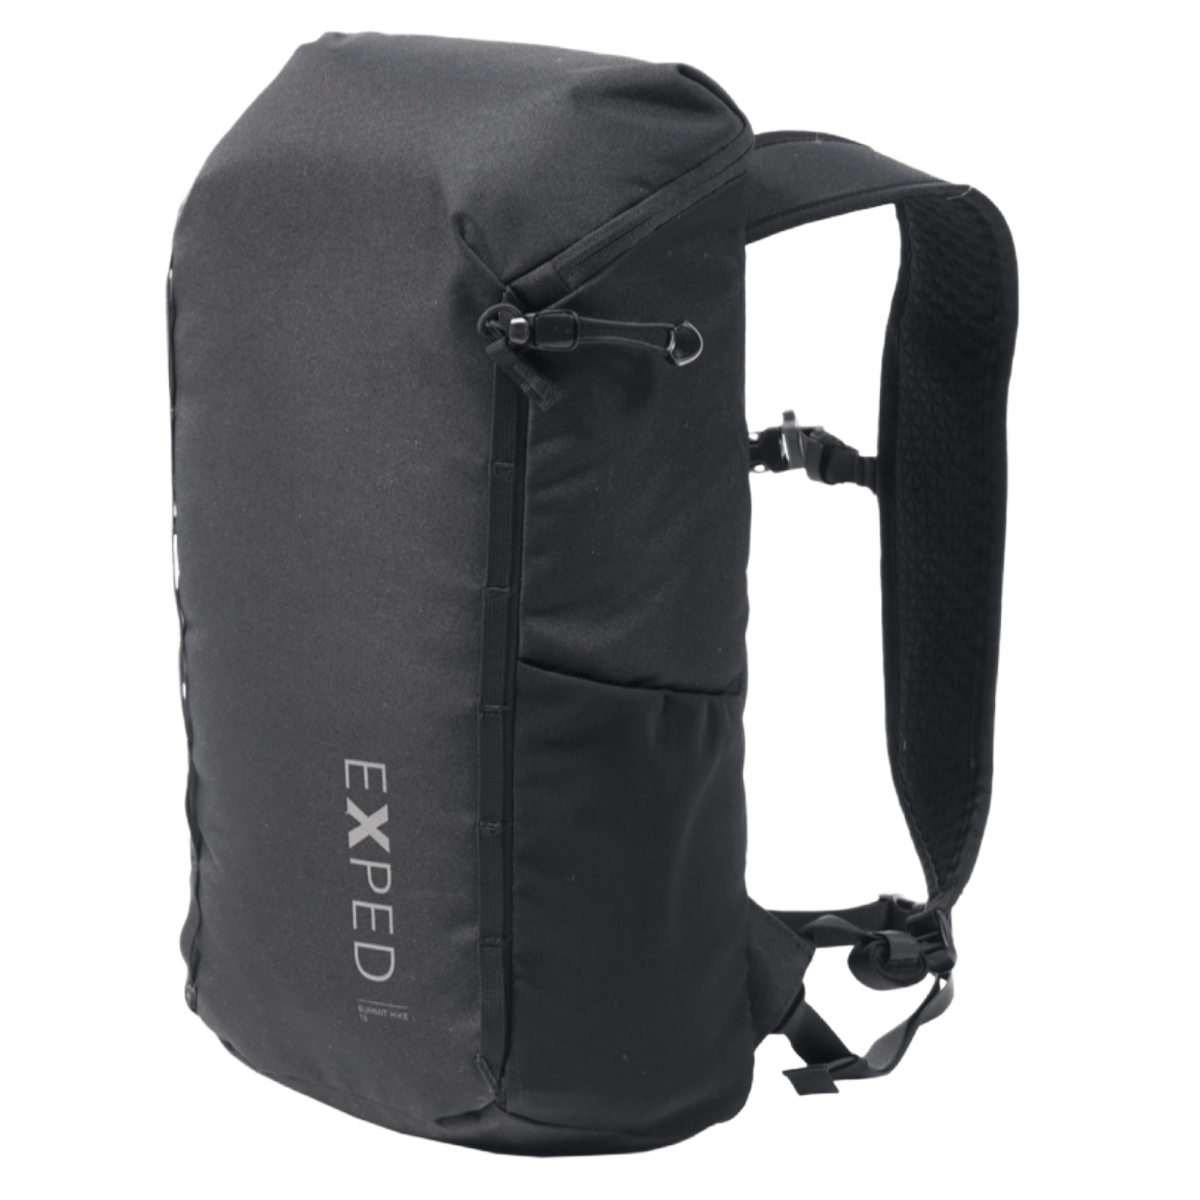 EXPED Backpack: Summit Hike 15 (3 colors) $25, Summit Hike 25 (2 colors) $30 + Free Shipping on $50+